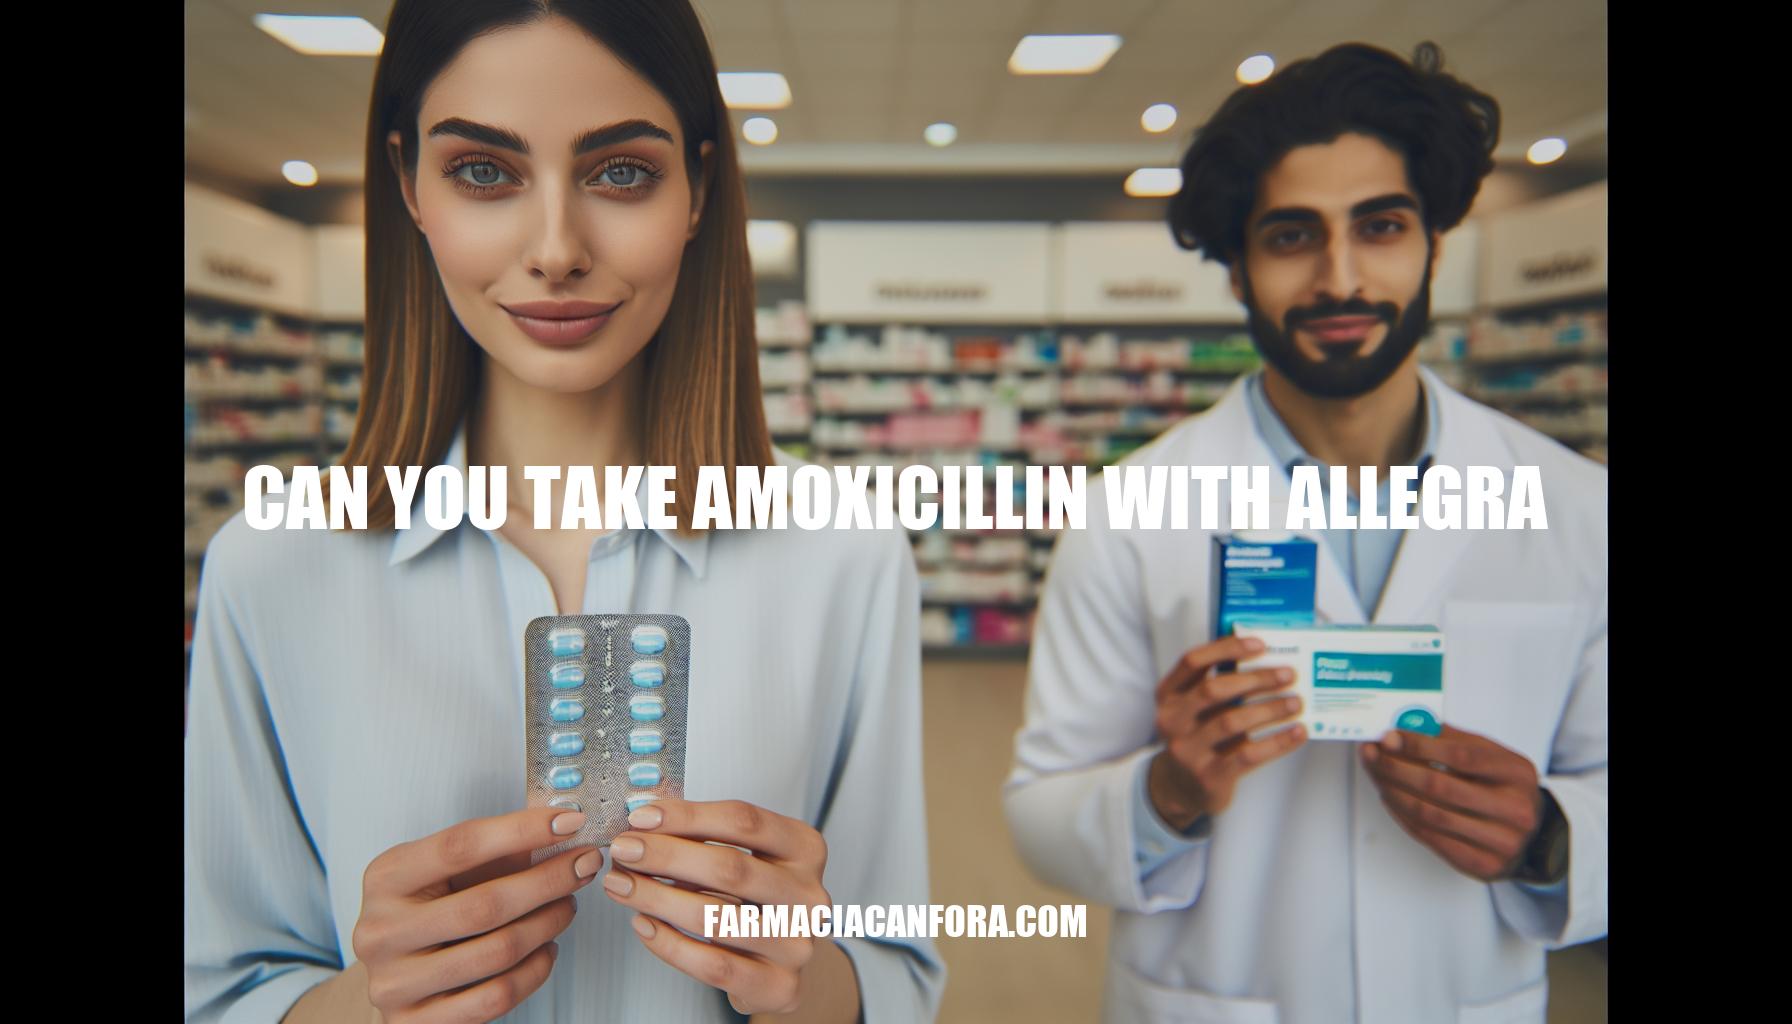 Can You Take Amoxicillin with Allegra